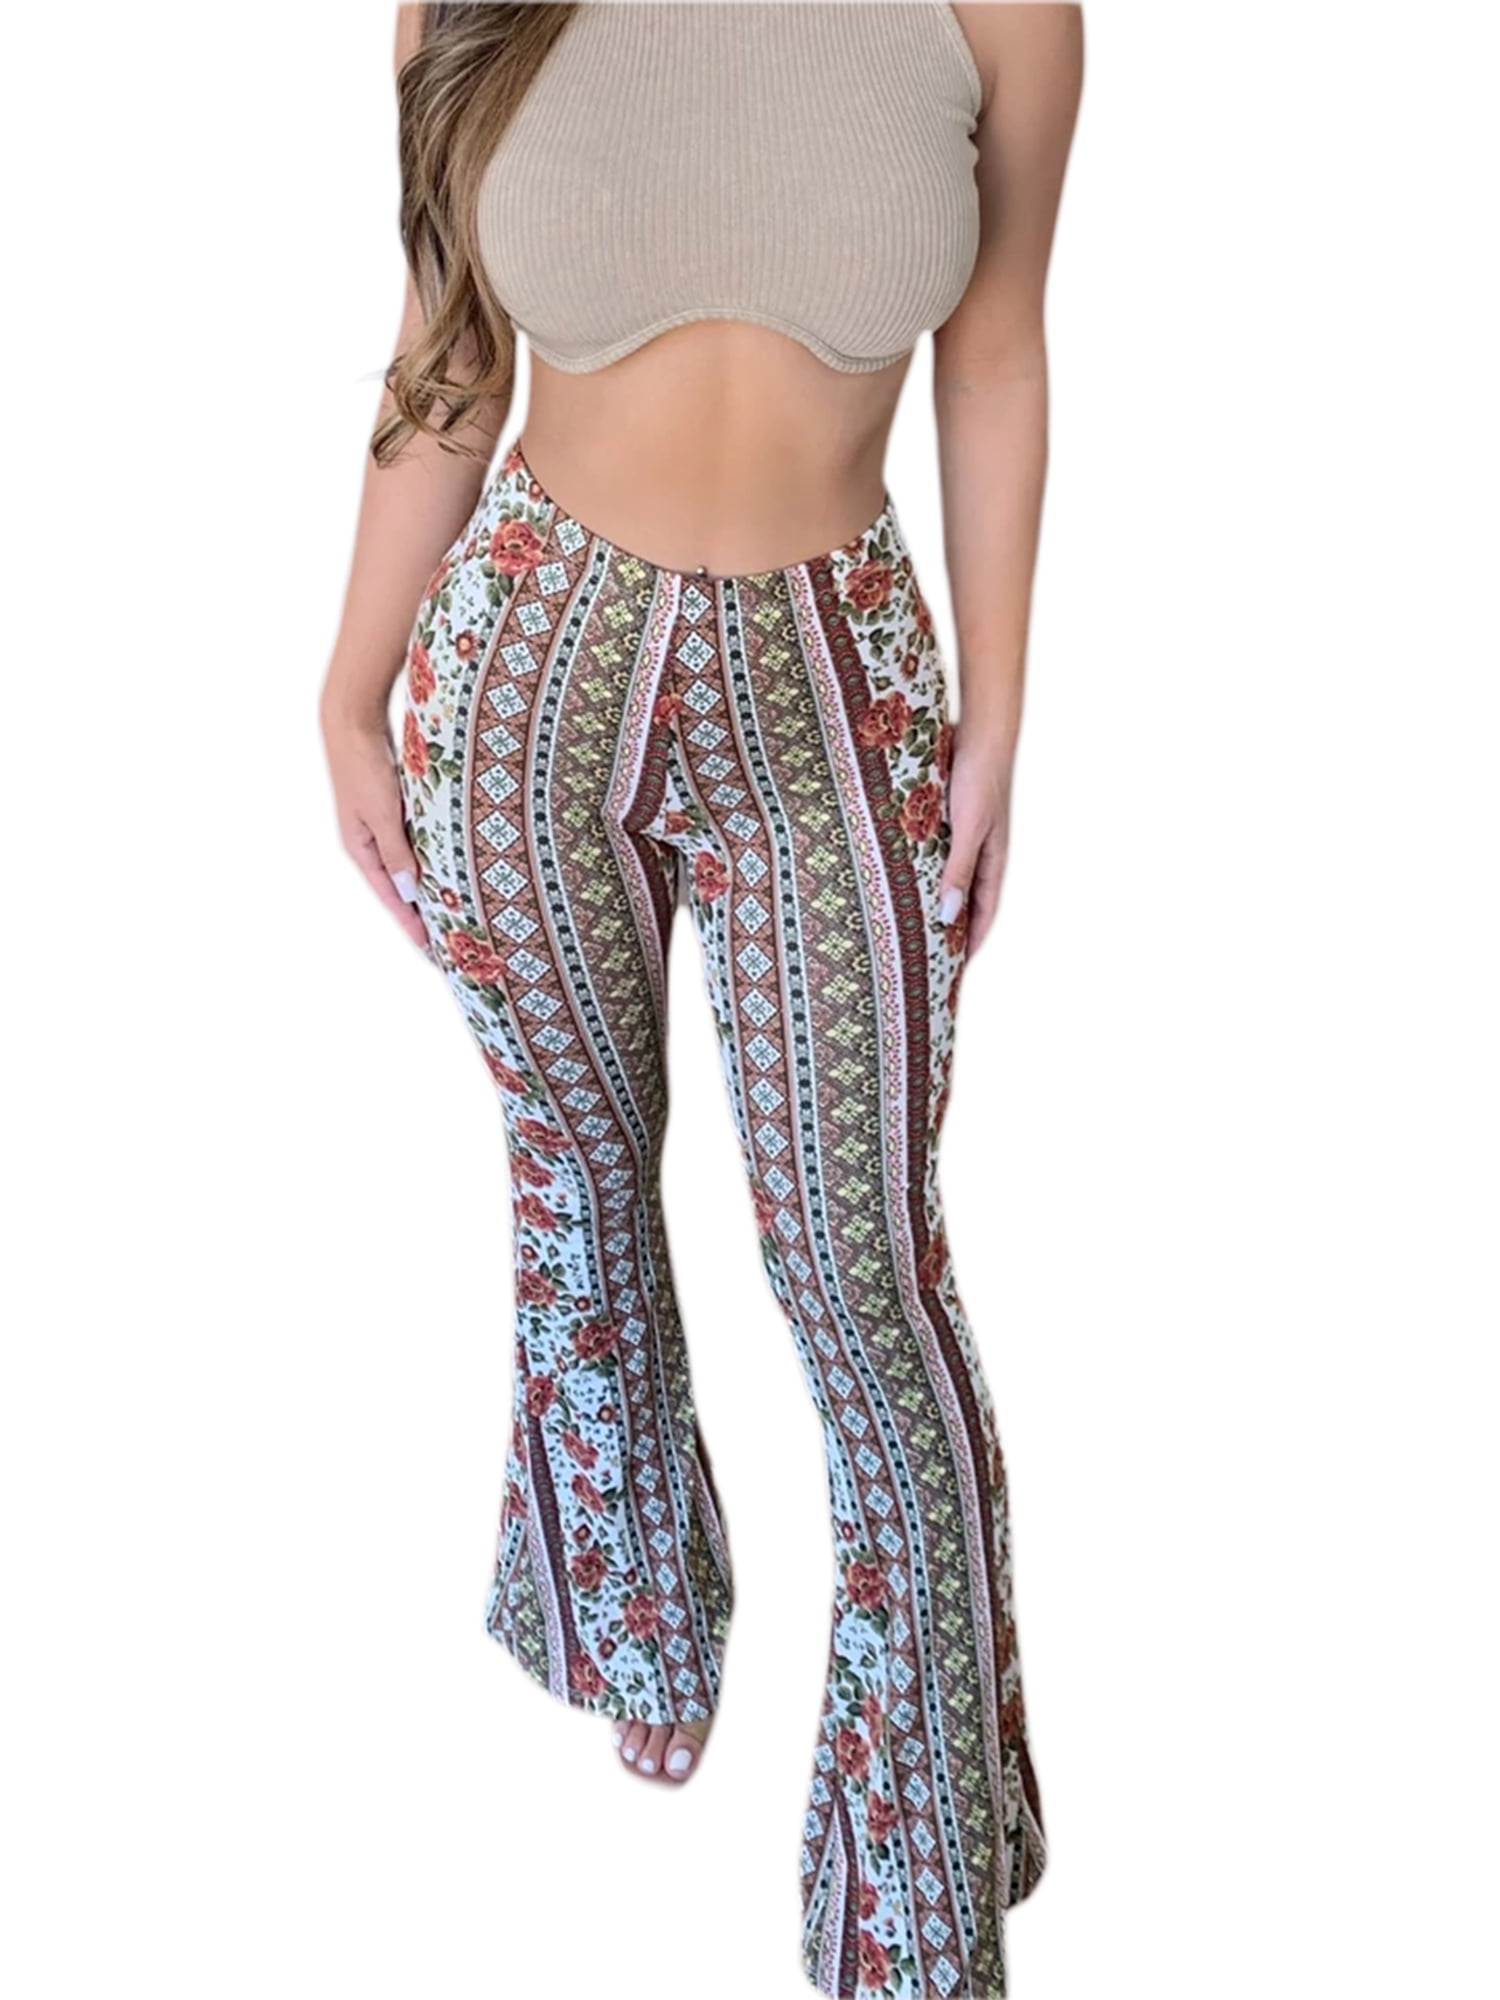 2Piece Womens Boho Casual Outfits Set,Shoulder Tie Floral Print Crop Top  Flared Belt Wide Leg Palazzo Pants Suit : Amazon.in: Clothing & Accessories